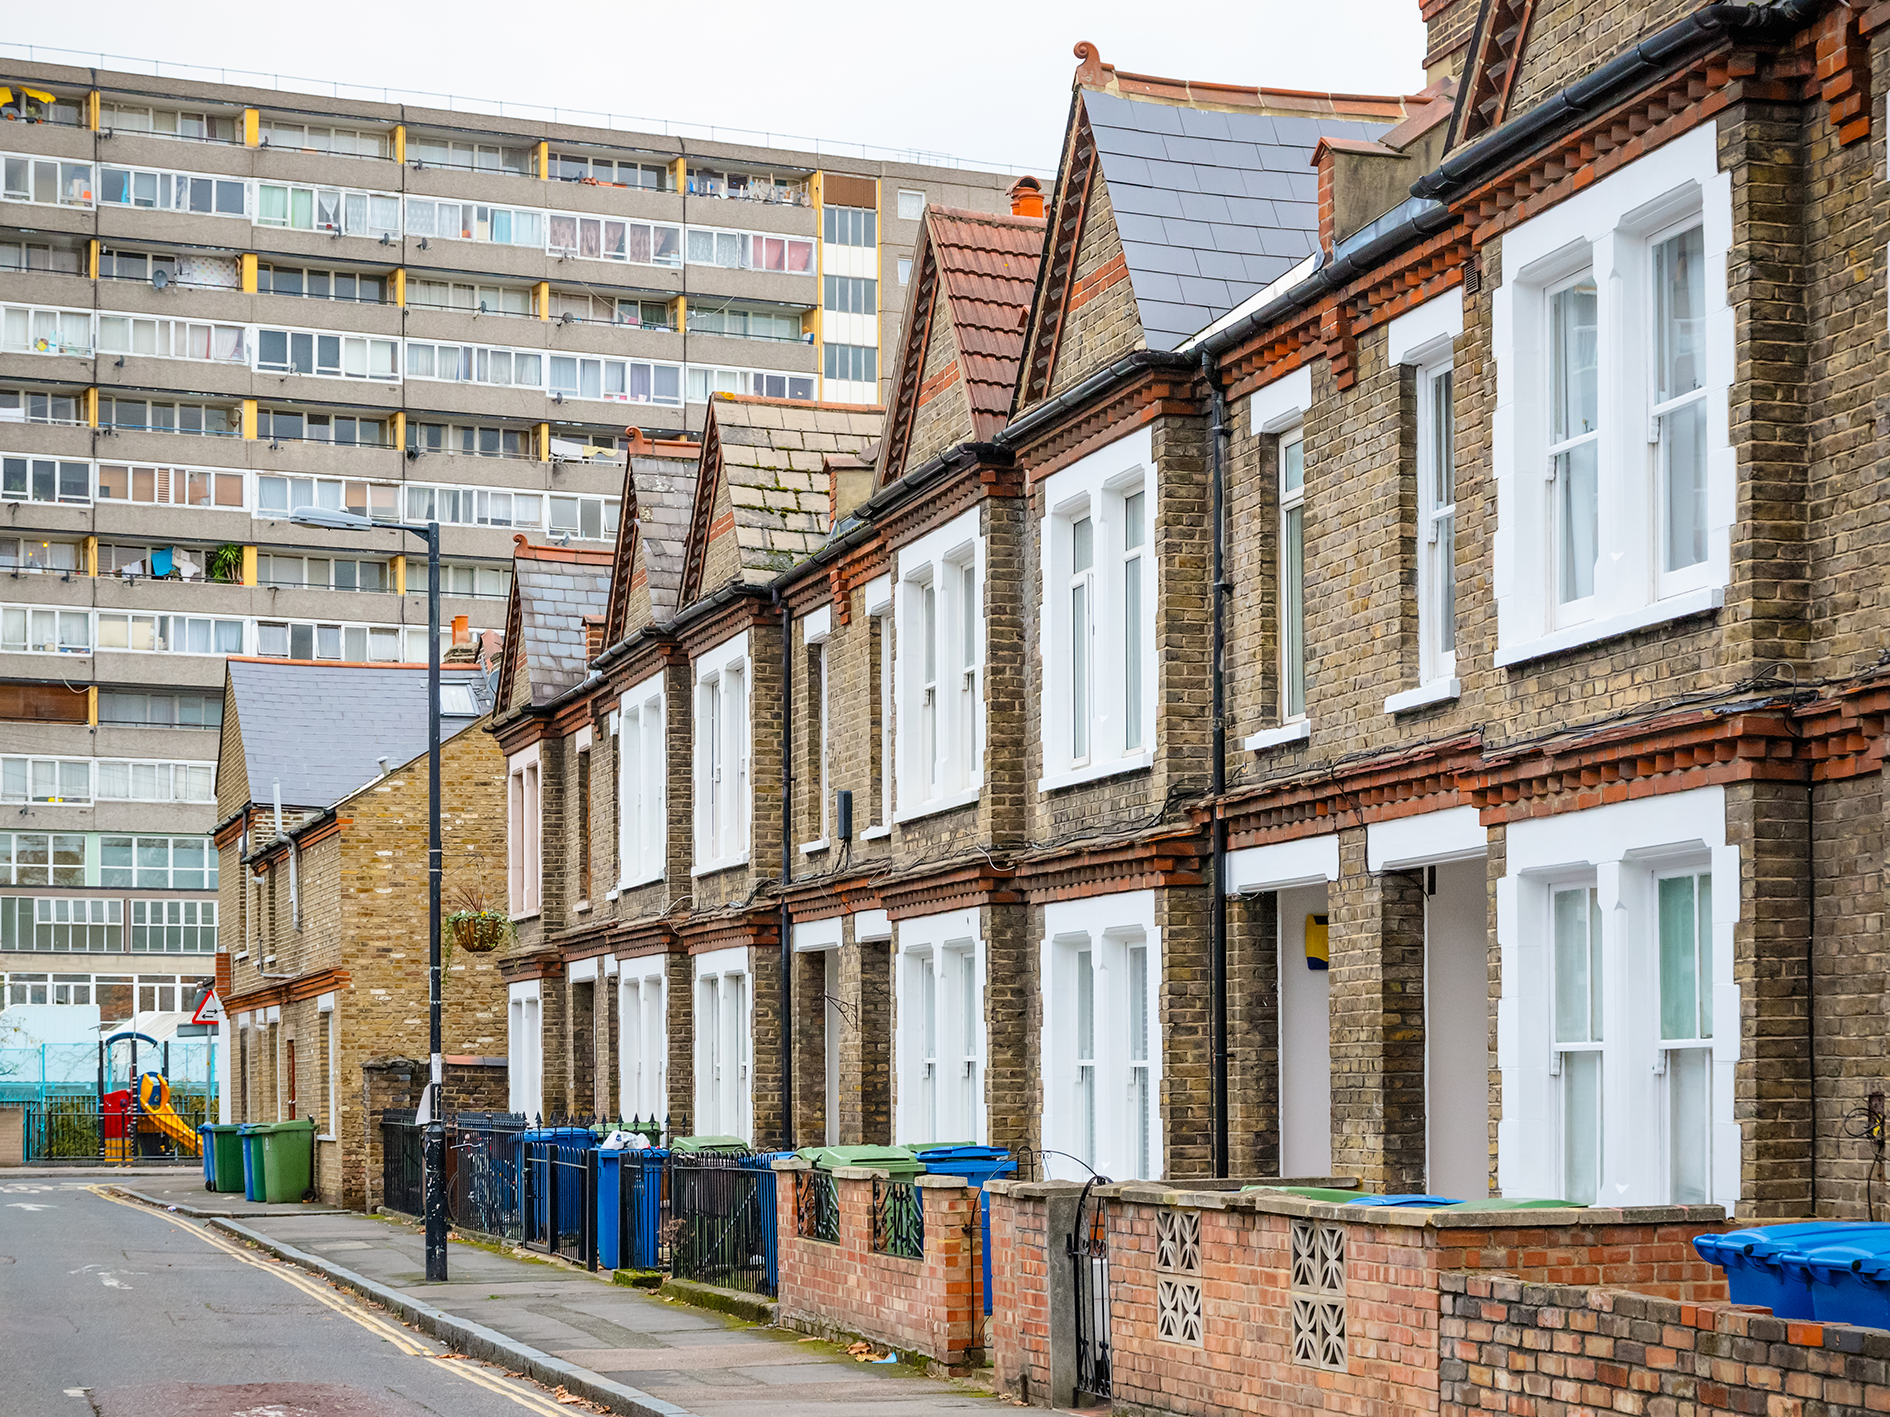 Poor housing costs the NHS £1.4bn a year